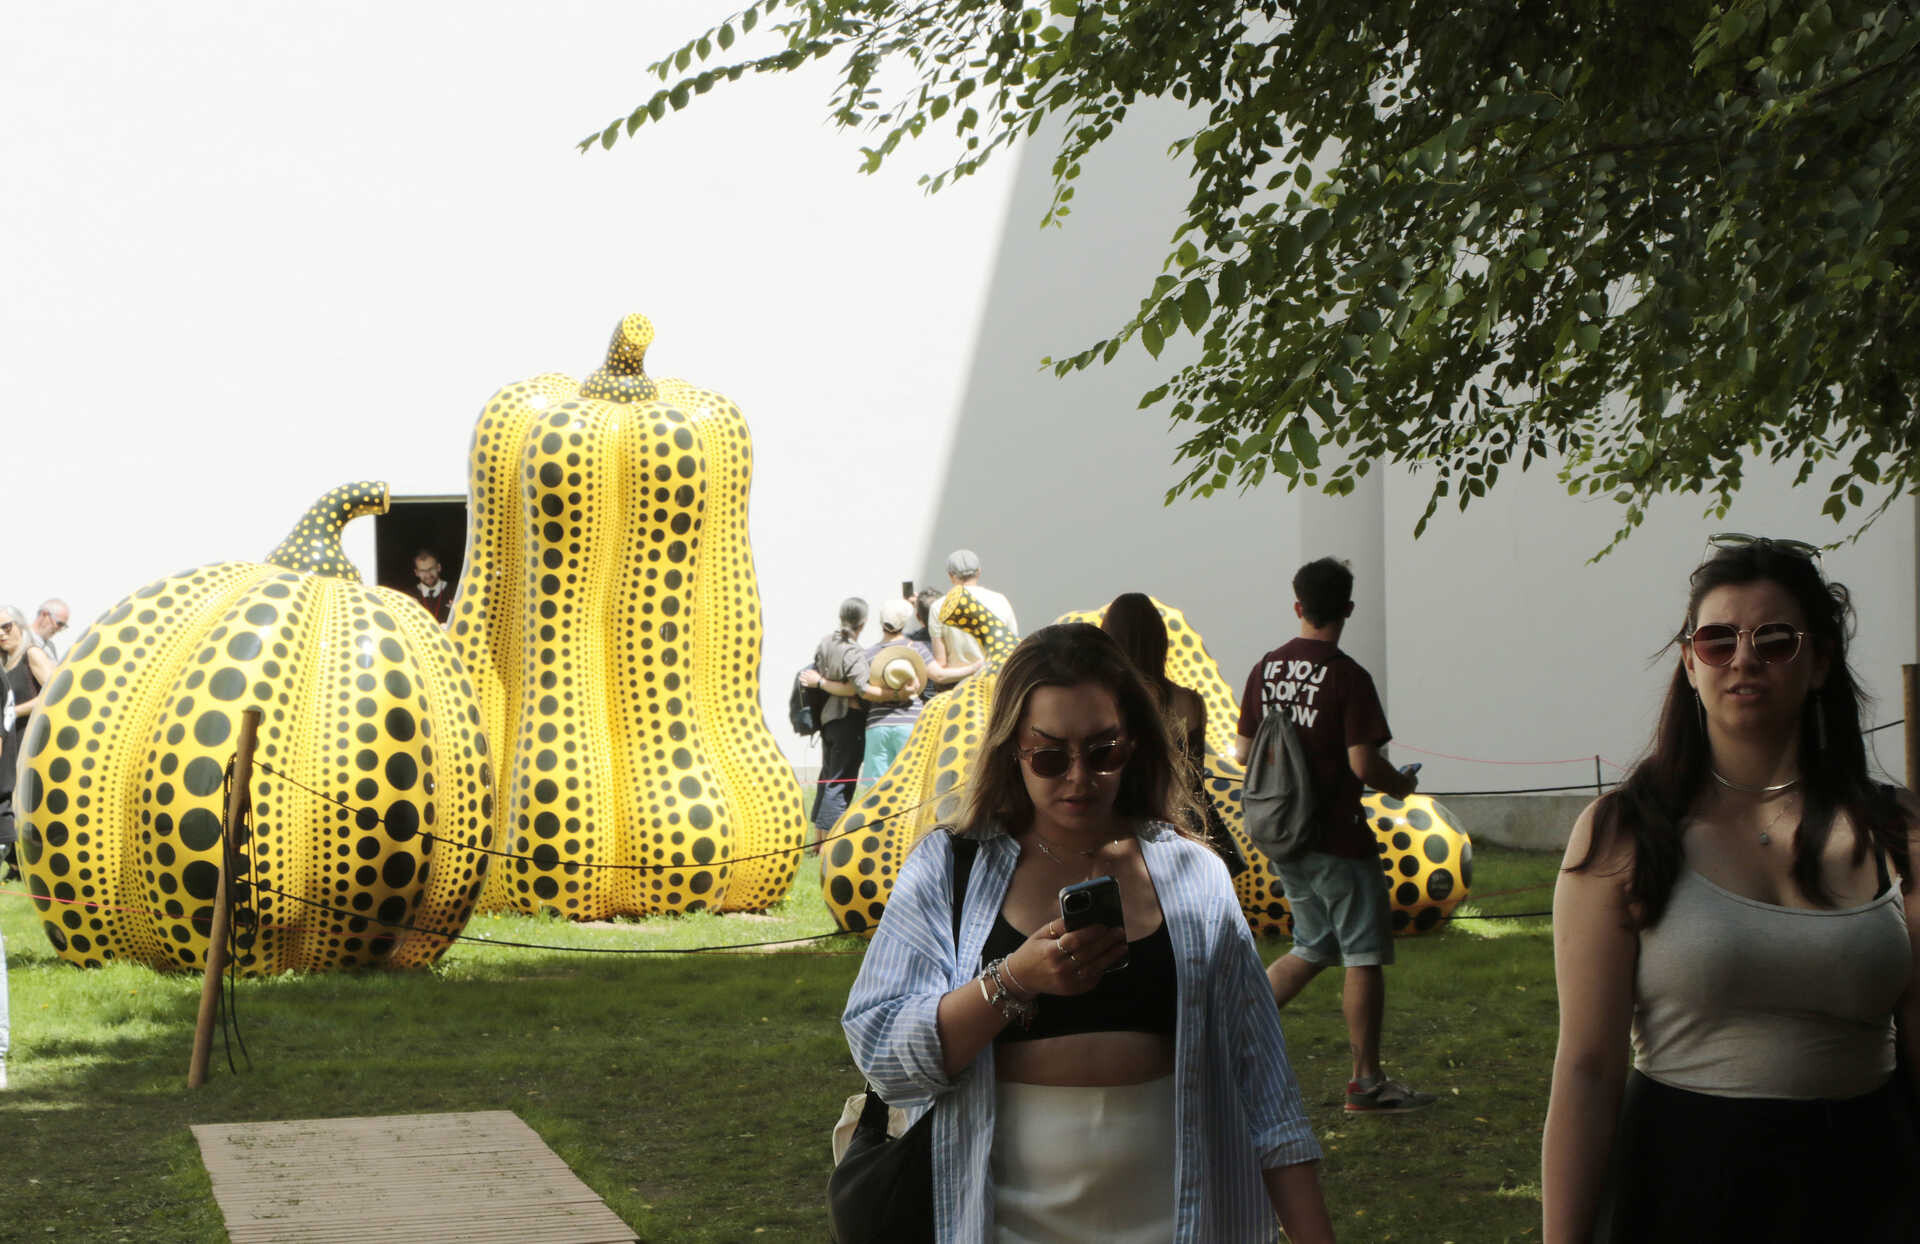 Yayoi Kusama is the queen of Serralves in a sunburnt festival